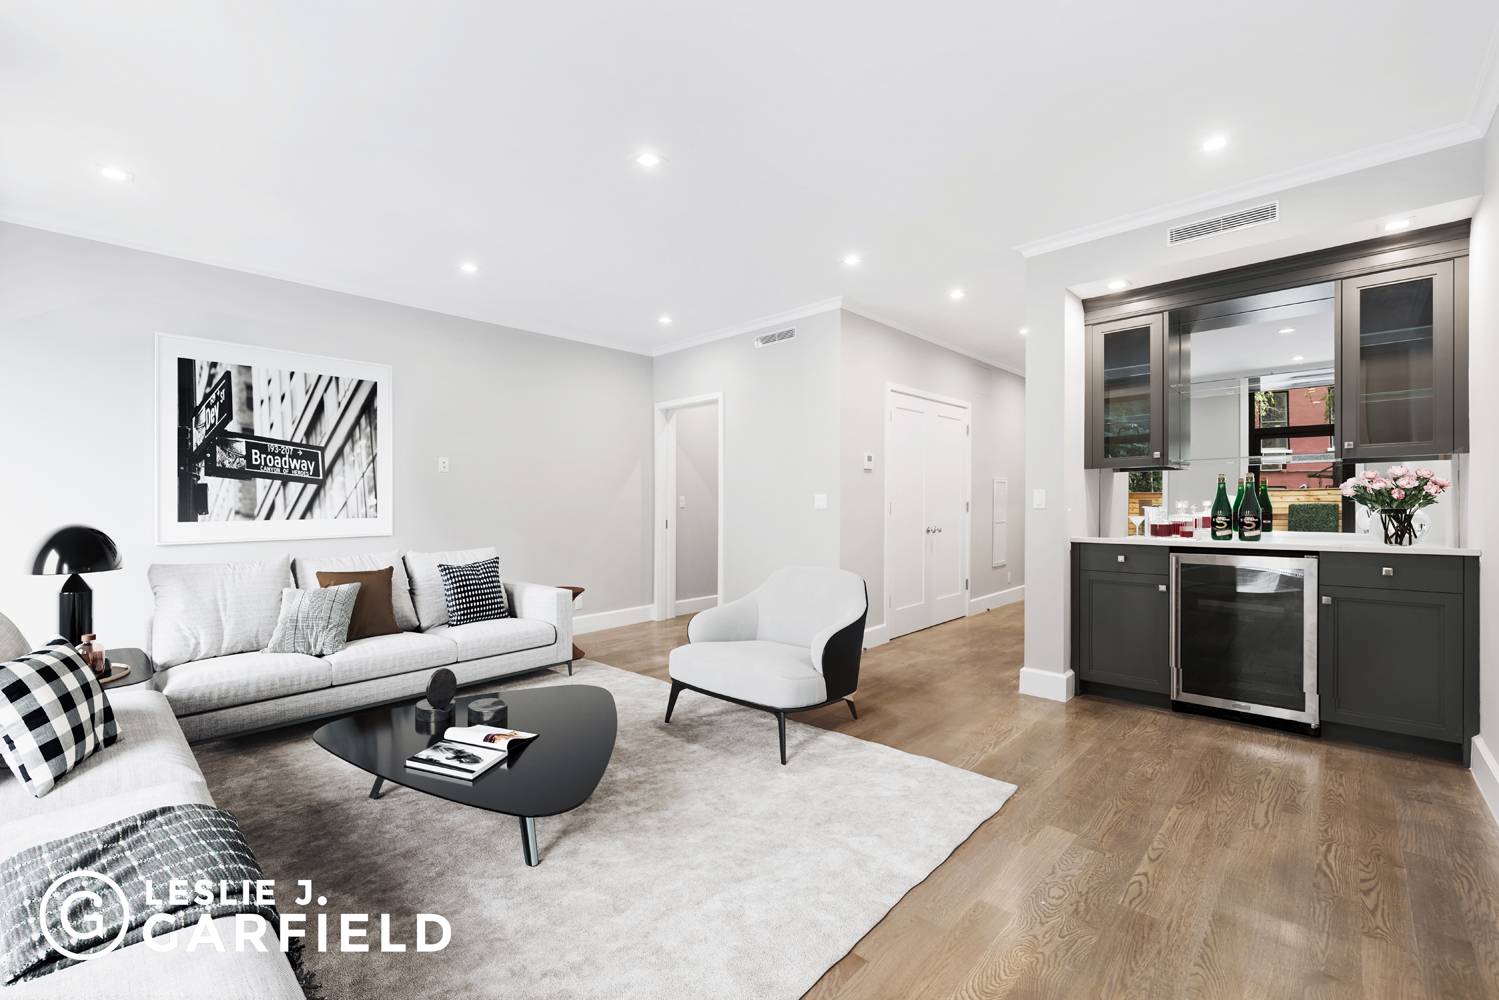 This garden triplex apartment is available in a 20' wide, two family, gut renovated, classic contemporary townhouse located blocks from Gramercy Park and Irving Place.